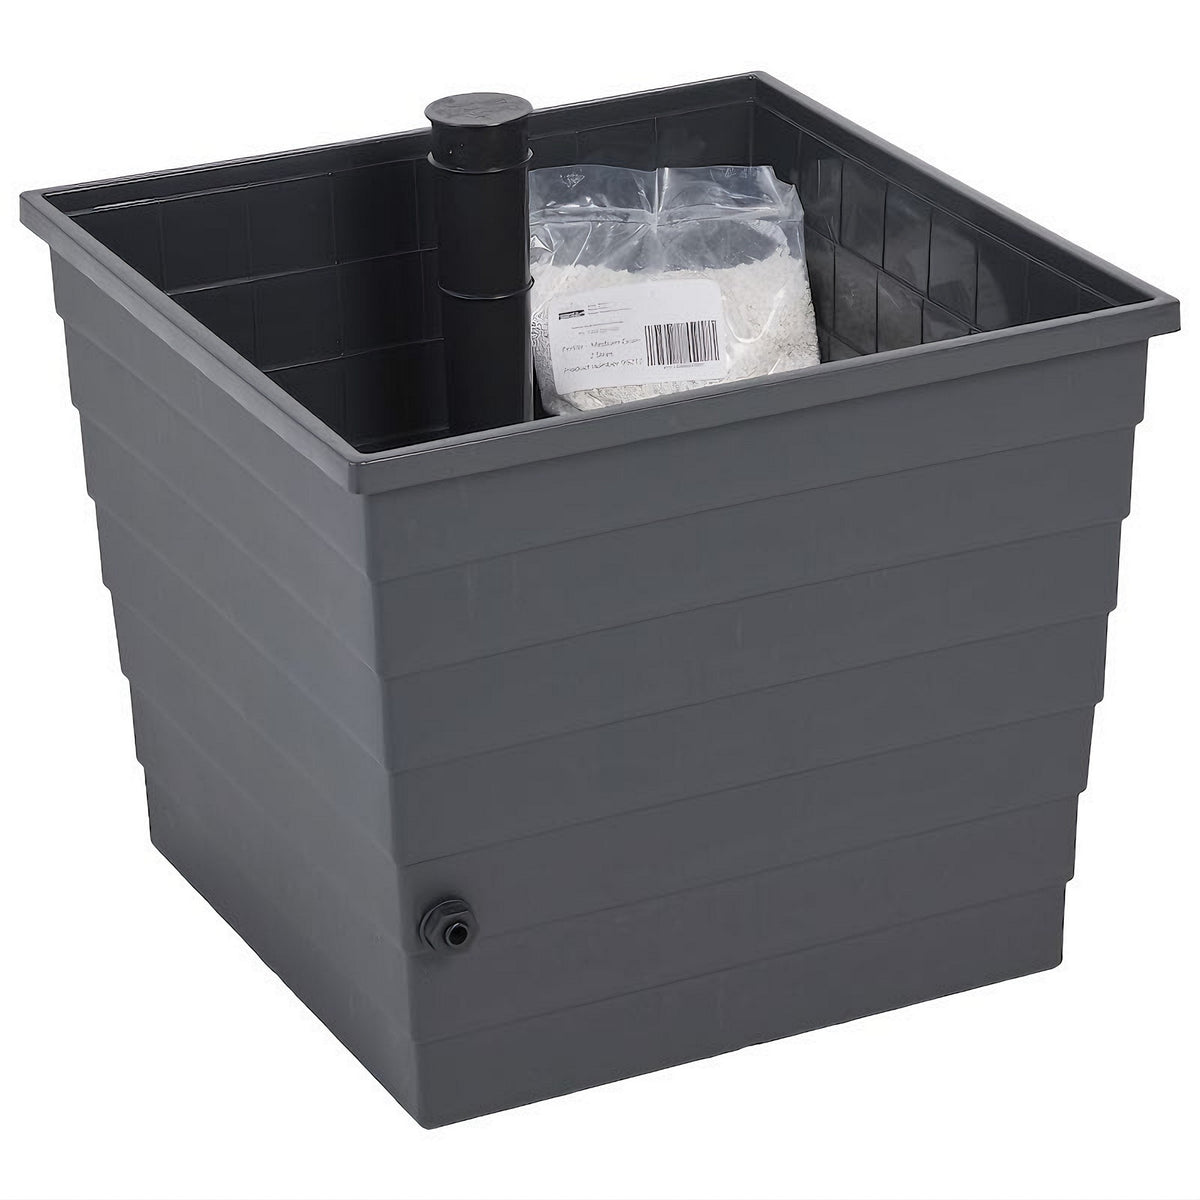 WaterUps wicking Square Planter in Monument Grey